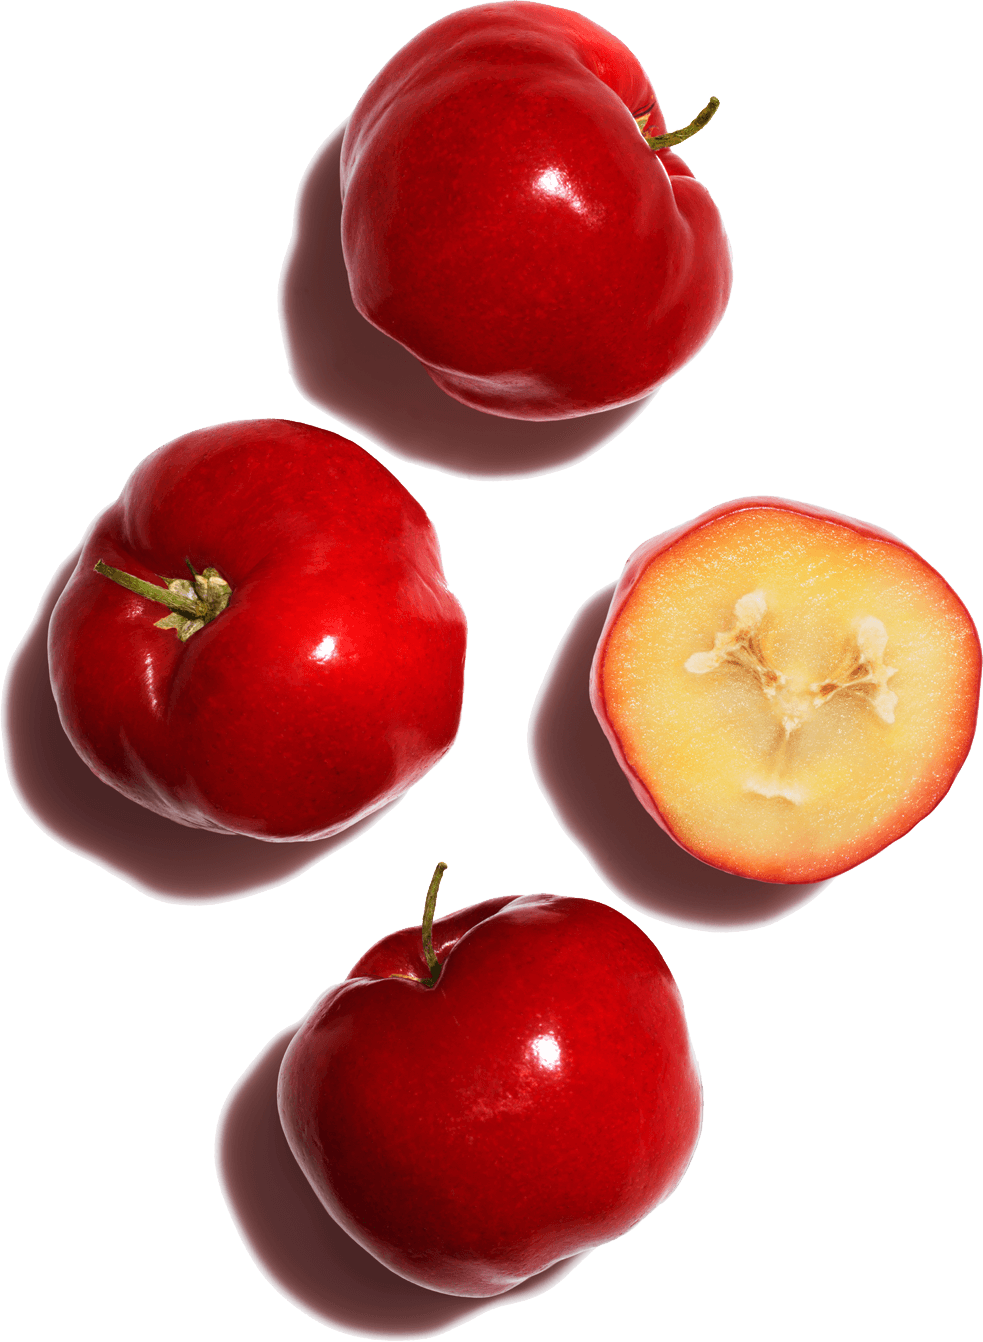 Acerola seed that helps to boost oxygen consumption